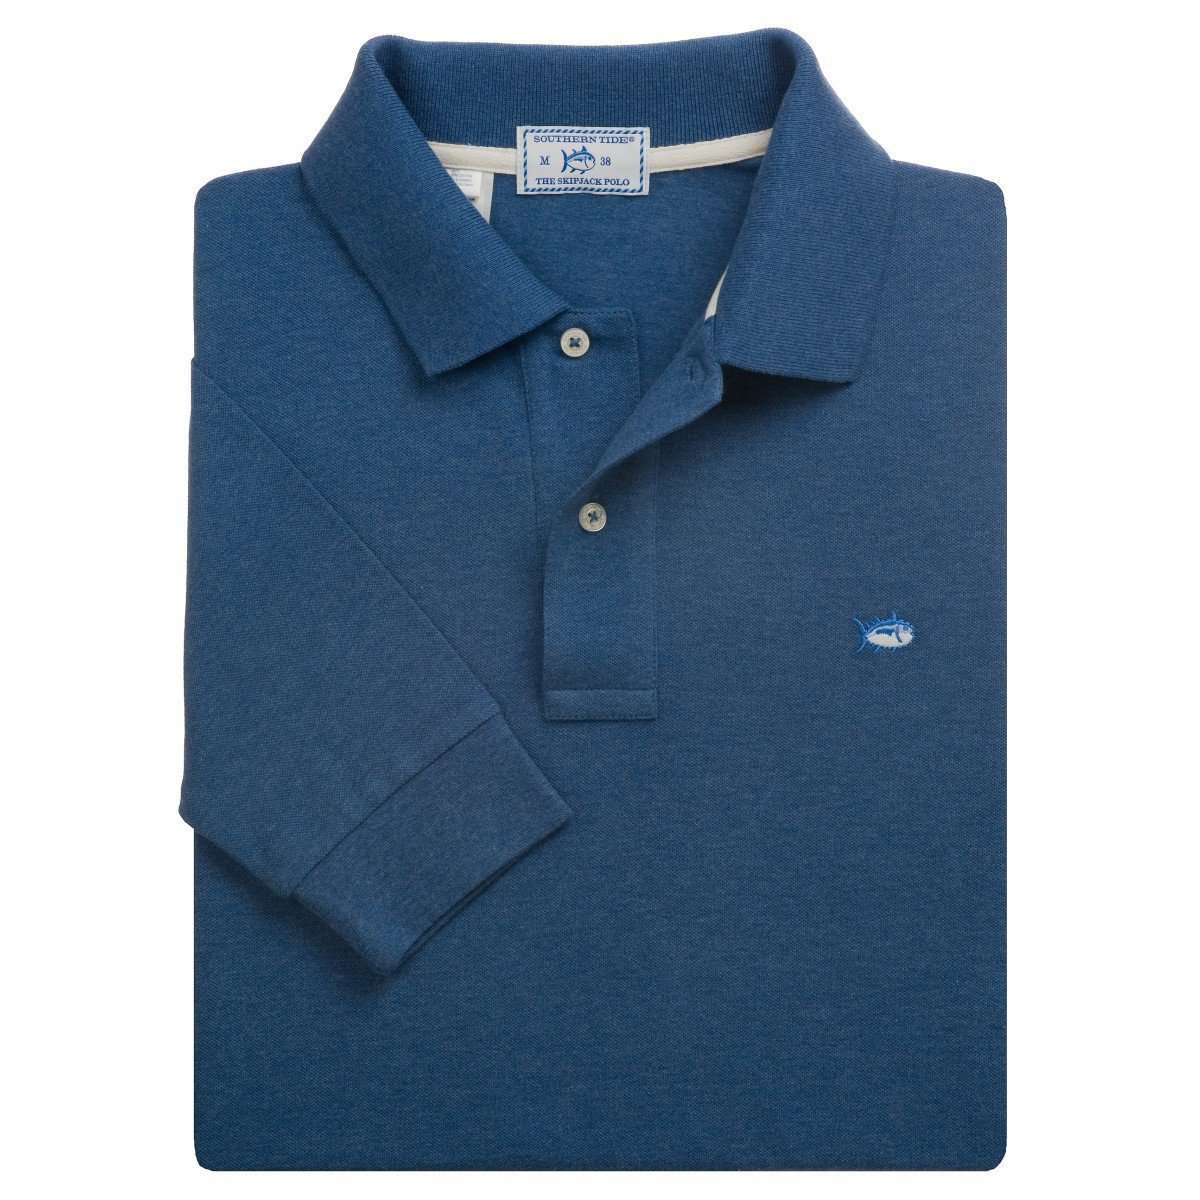 Long Sleeve Heathered Skipjack Polo in Blue Rapids by Southern Tide - Country Club Prep